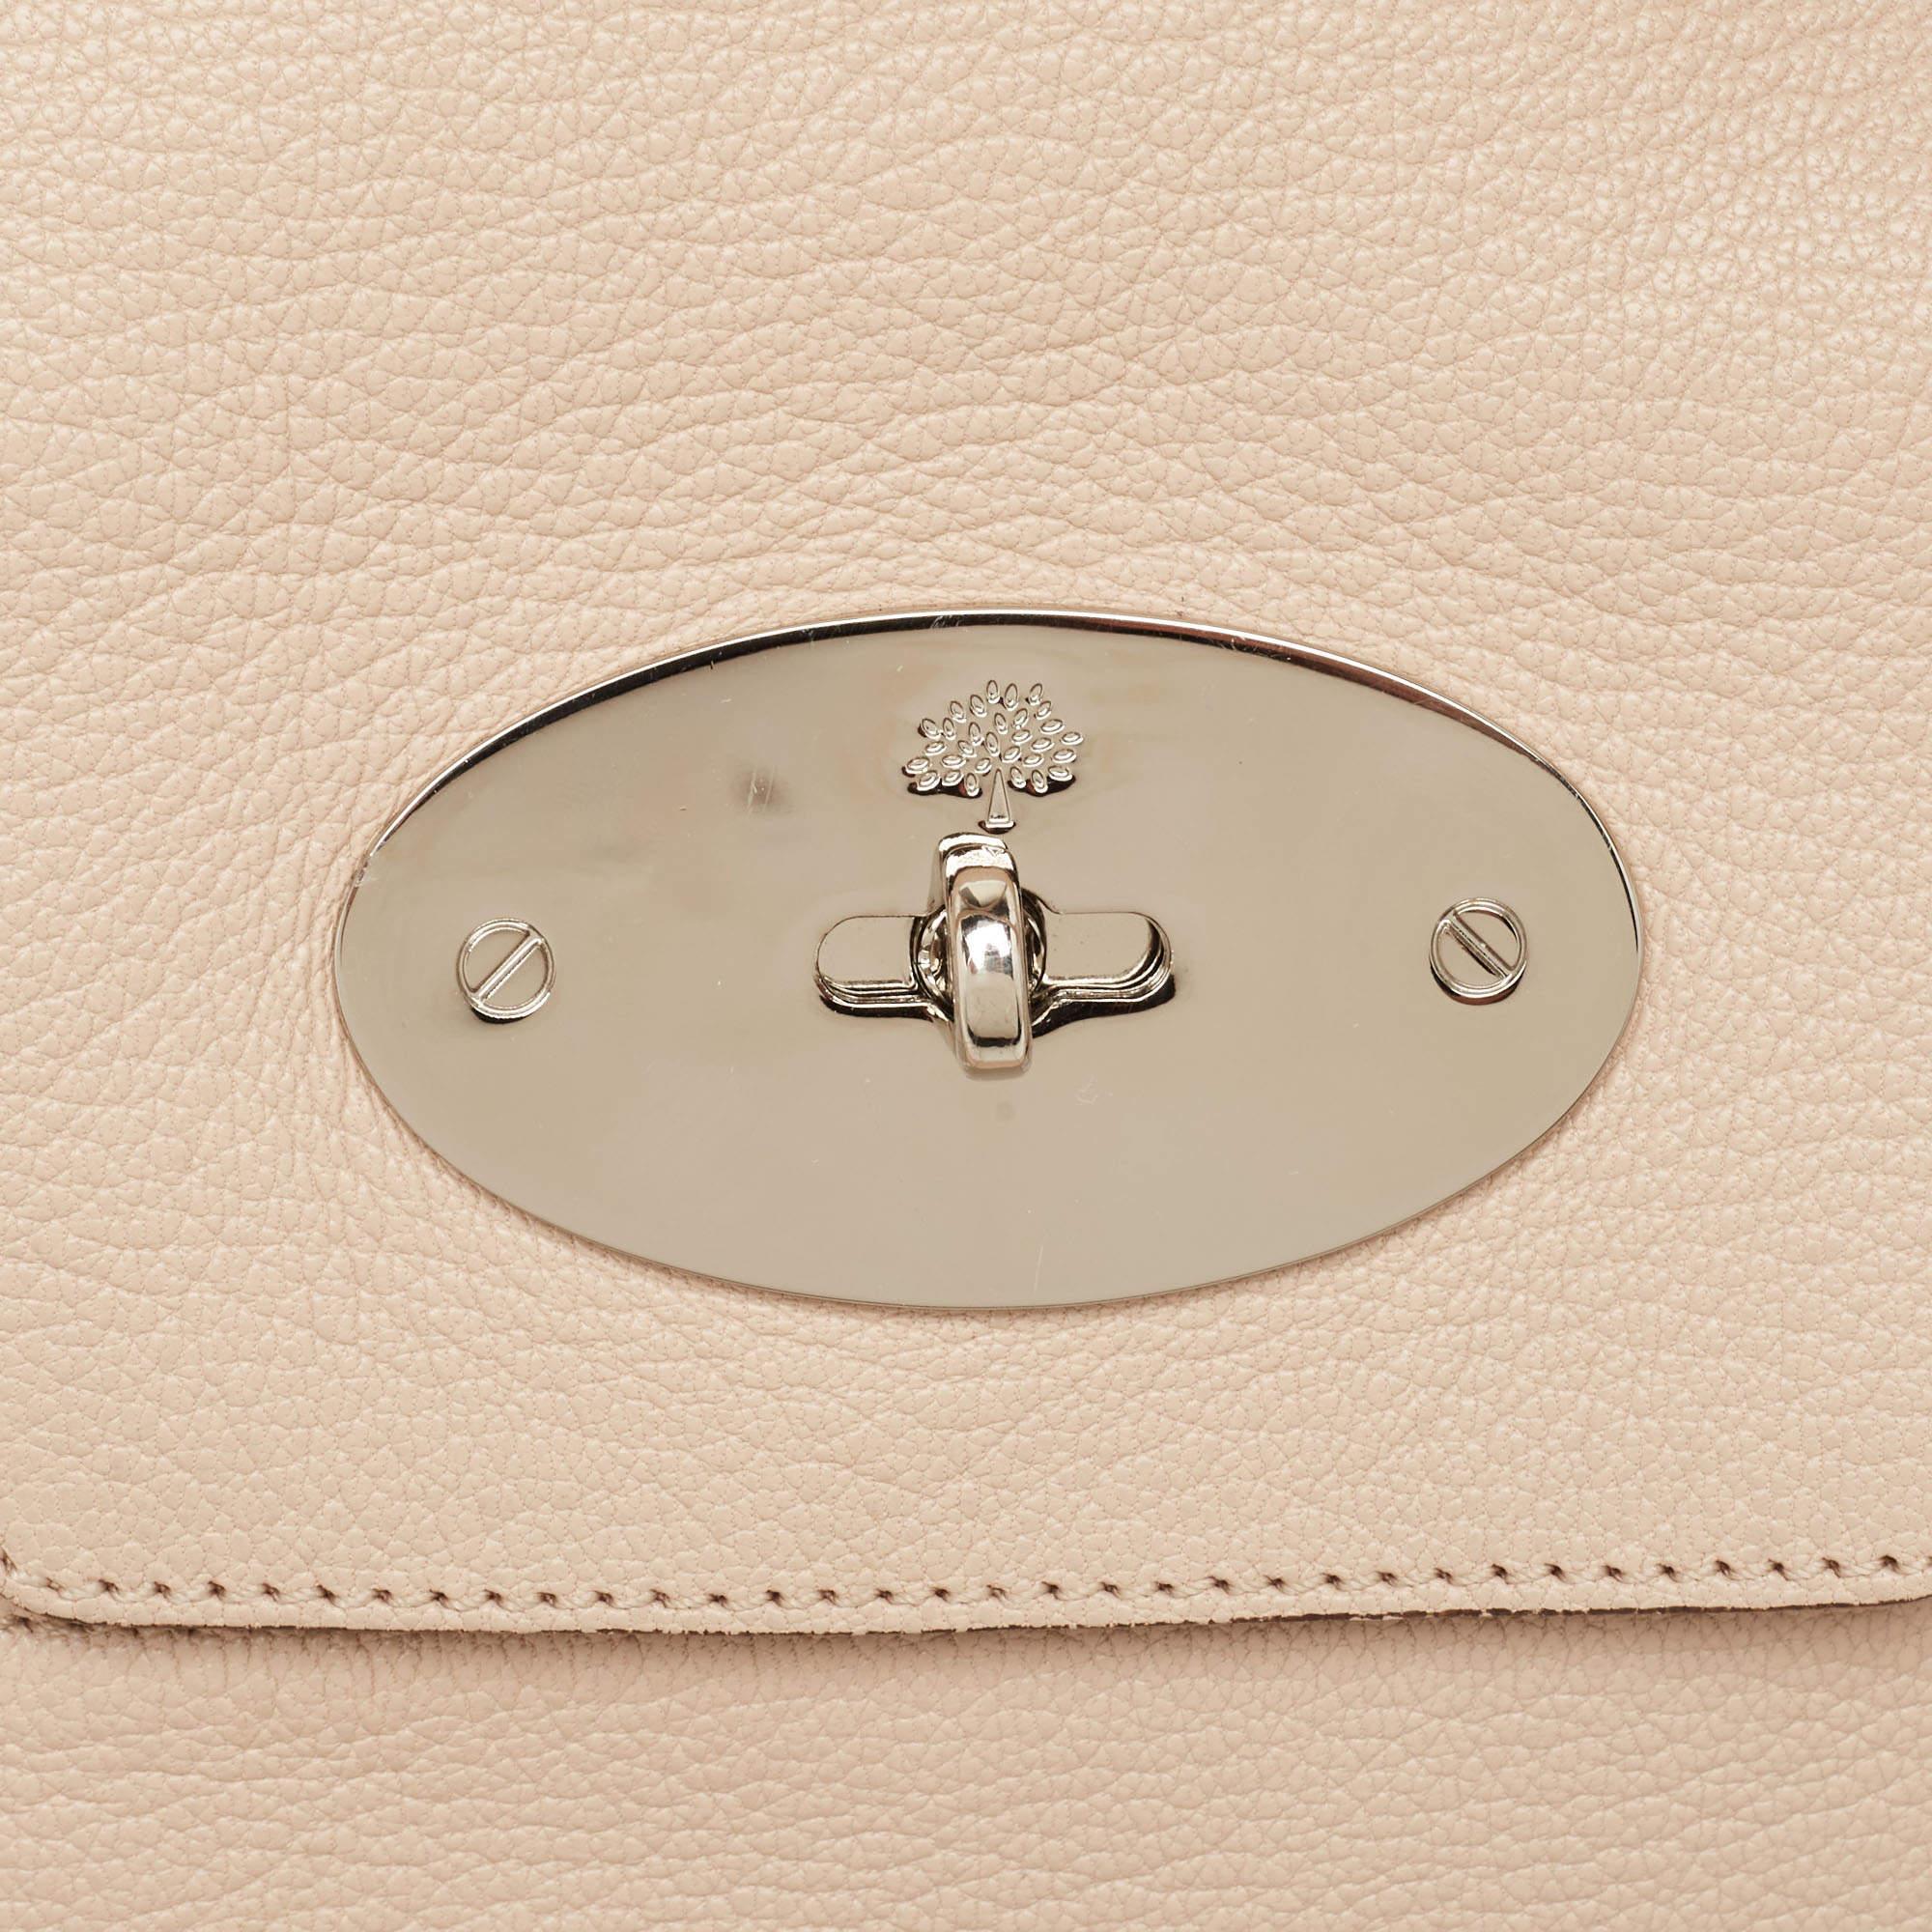 Mulberry Beige Leather Bayswater Satchel 4